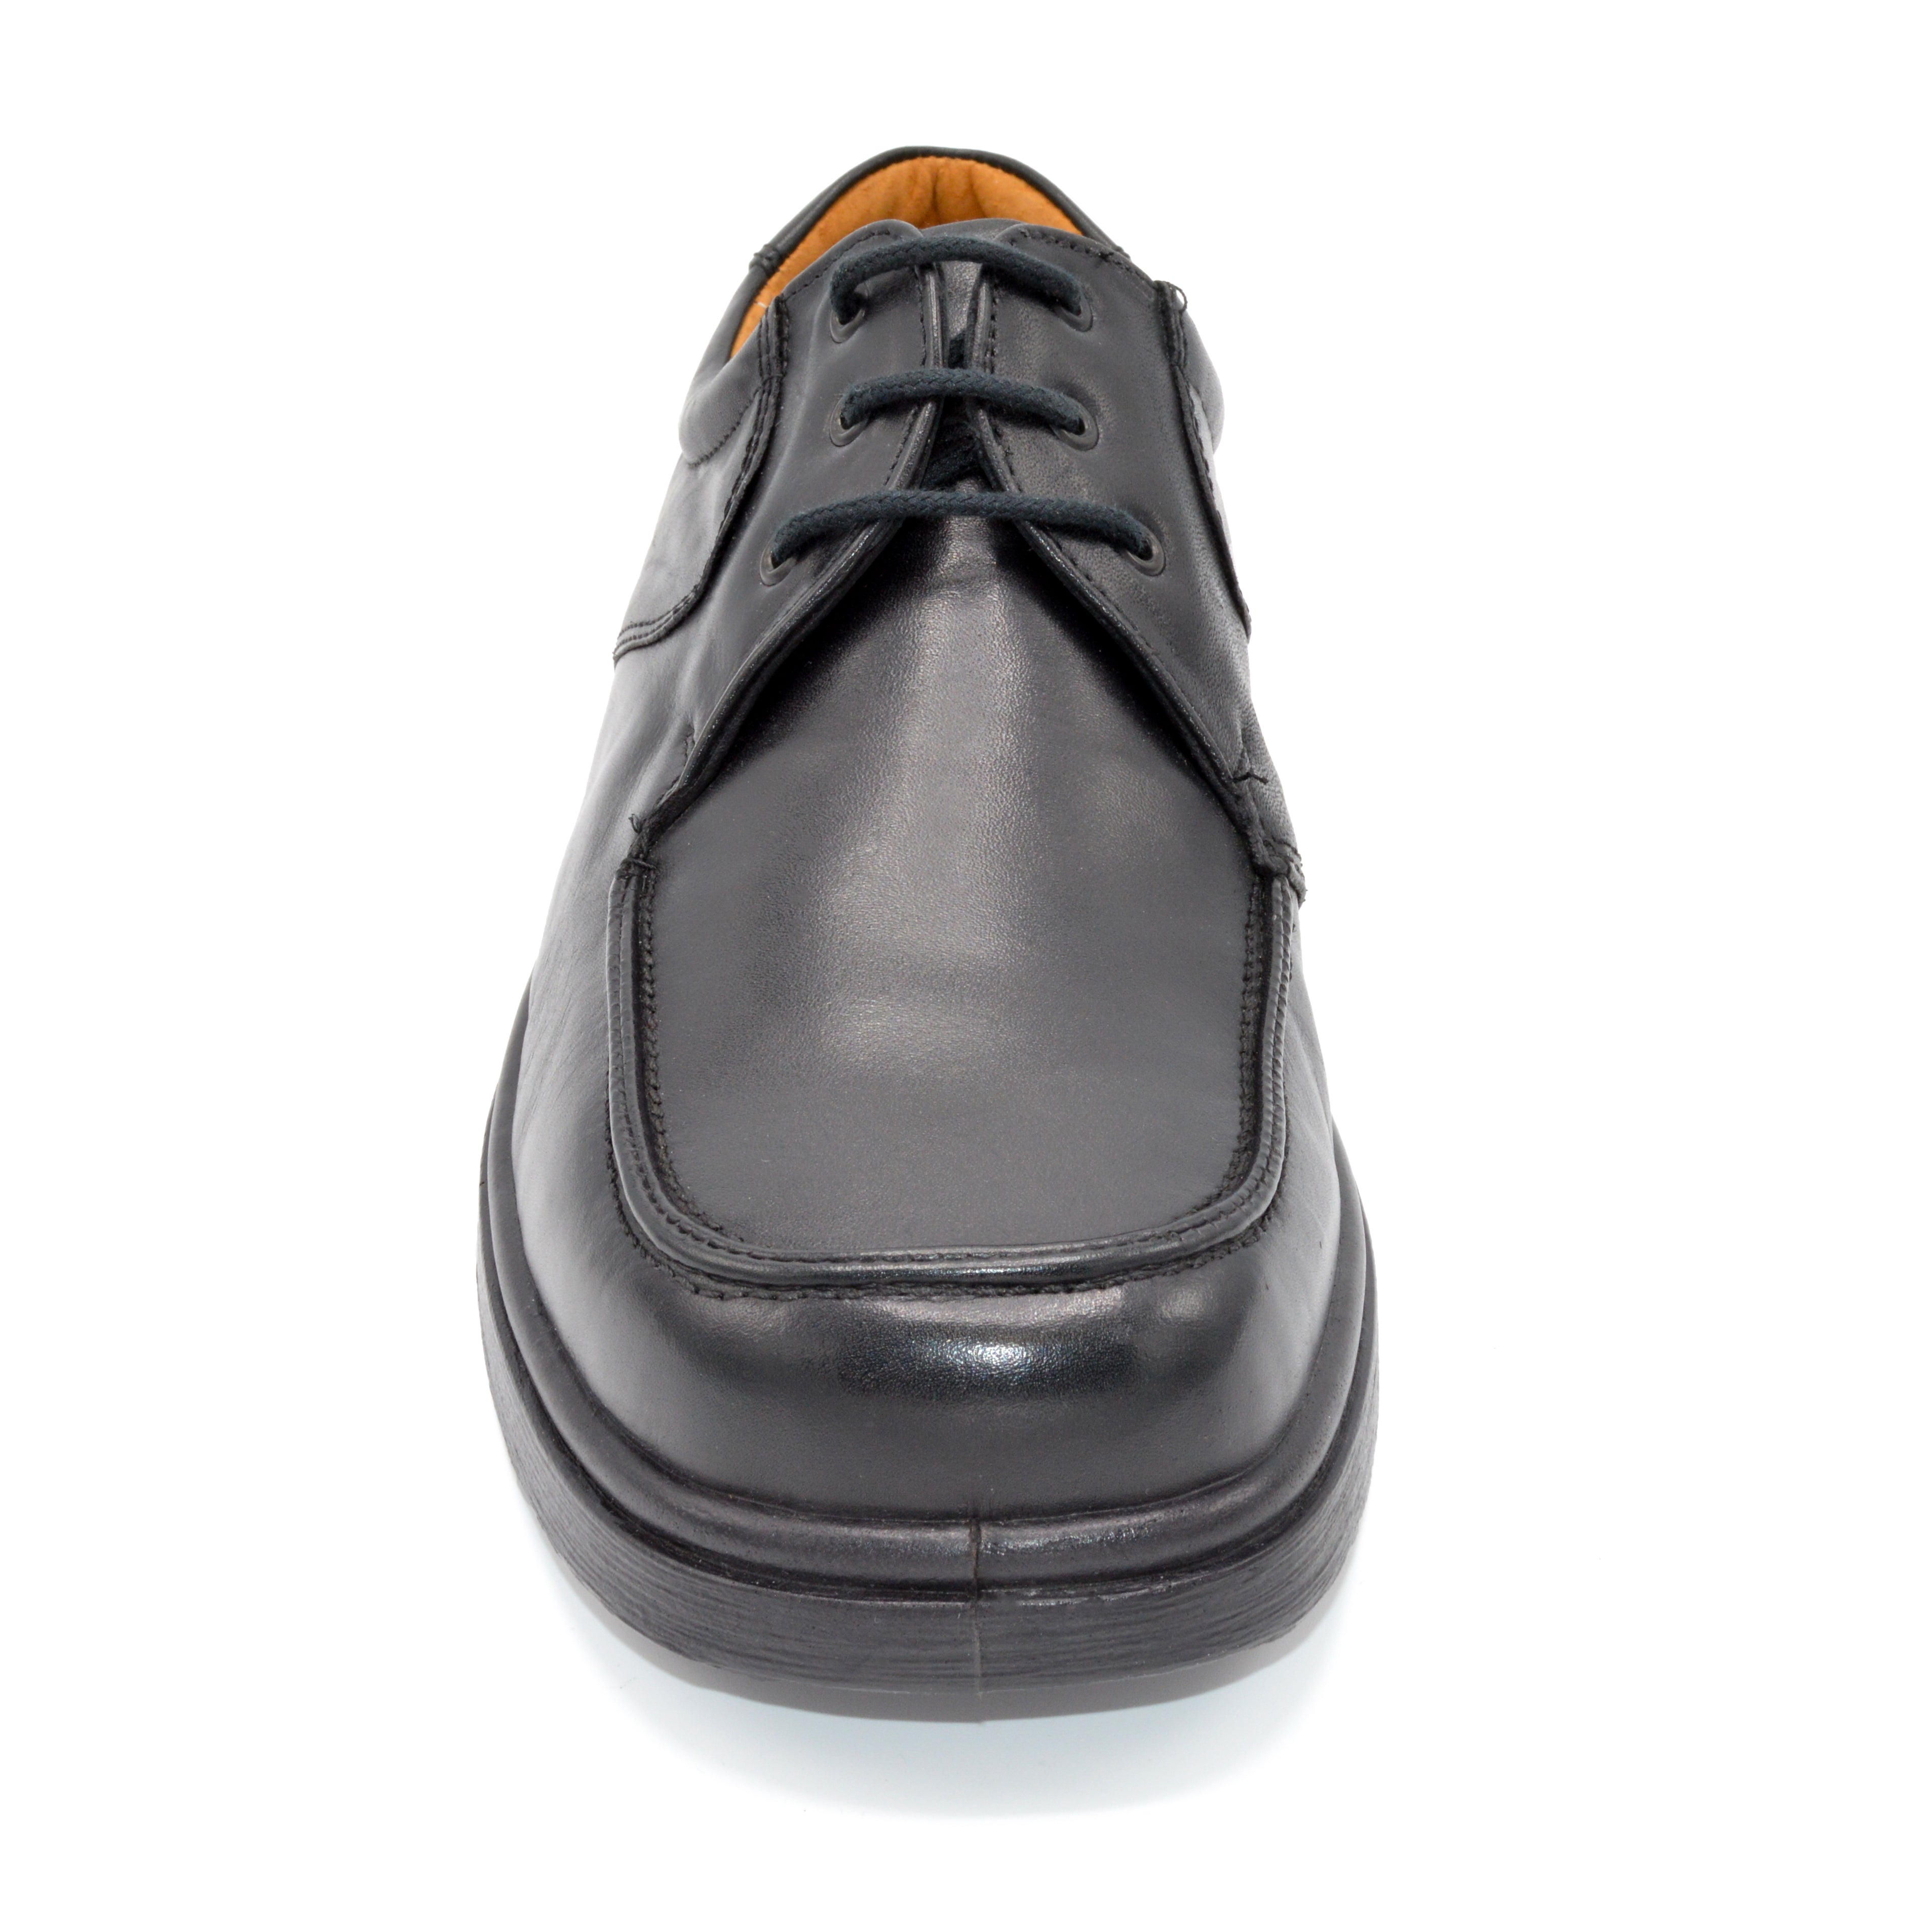 Black Leather Extra Wide Shoe For Orthotics